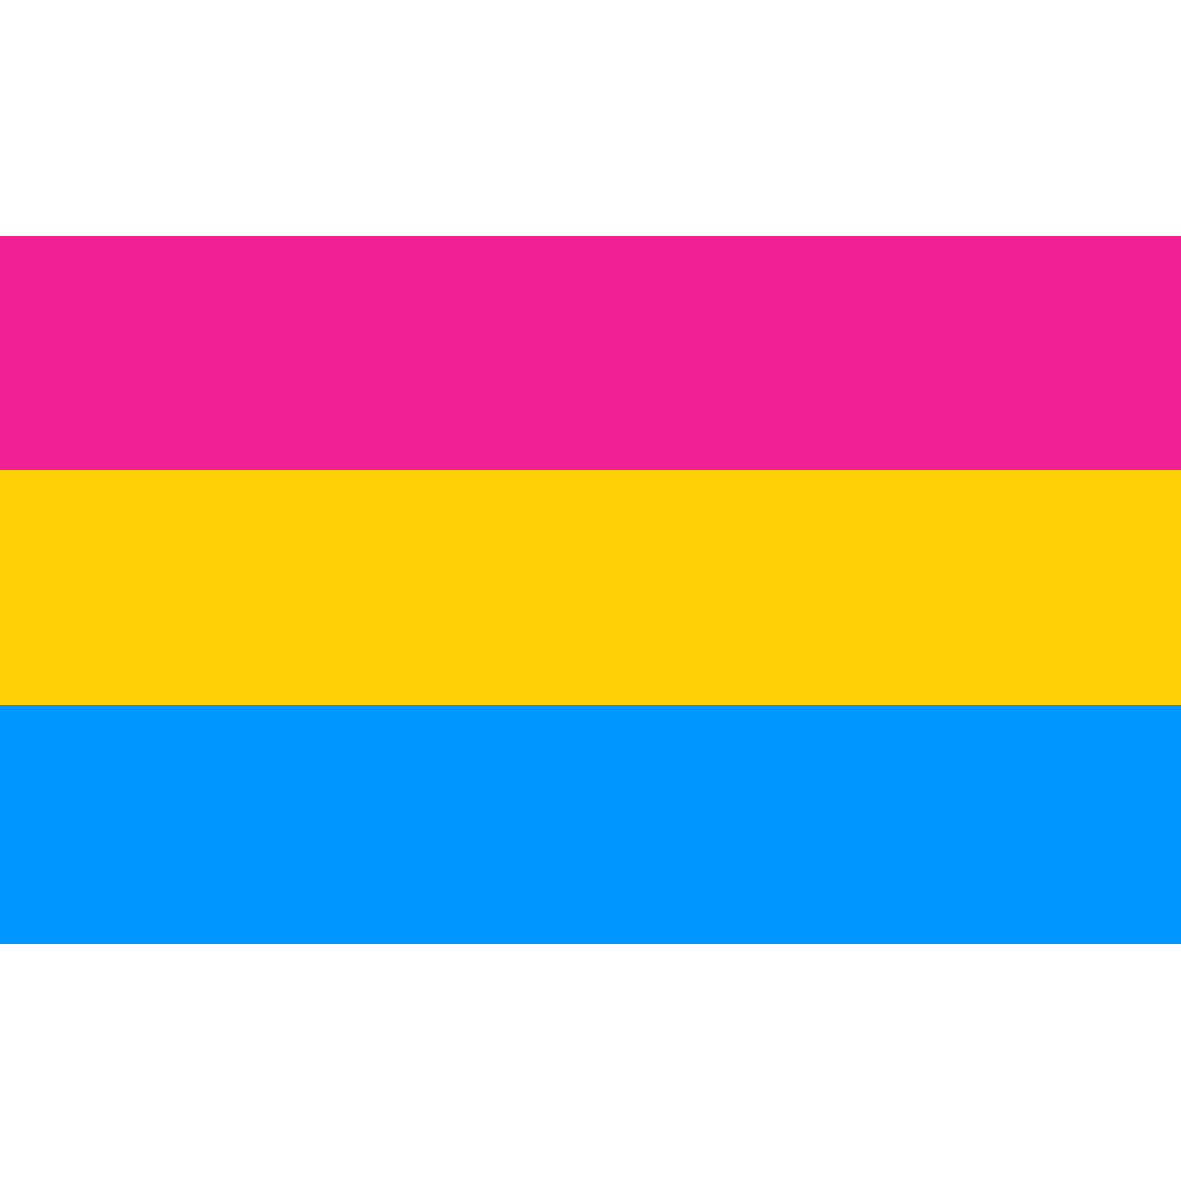 Pansexual Flag Flag Pansexuality Pansexual Pride · Free Image On Pixabay Colors Are Magenta 